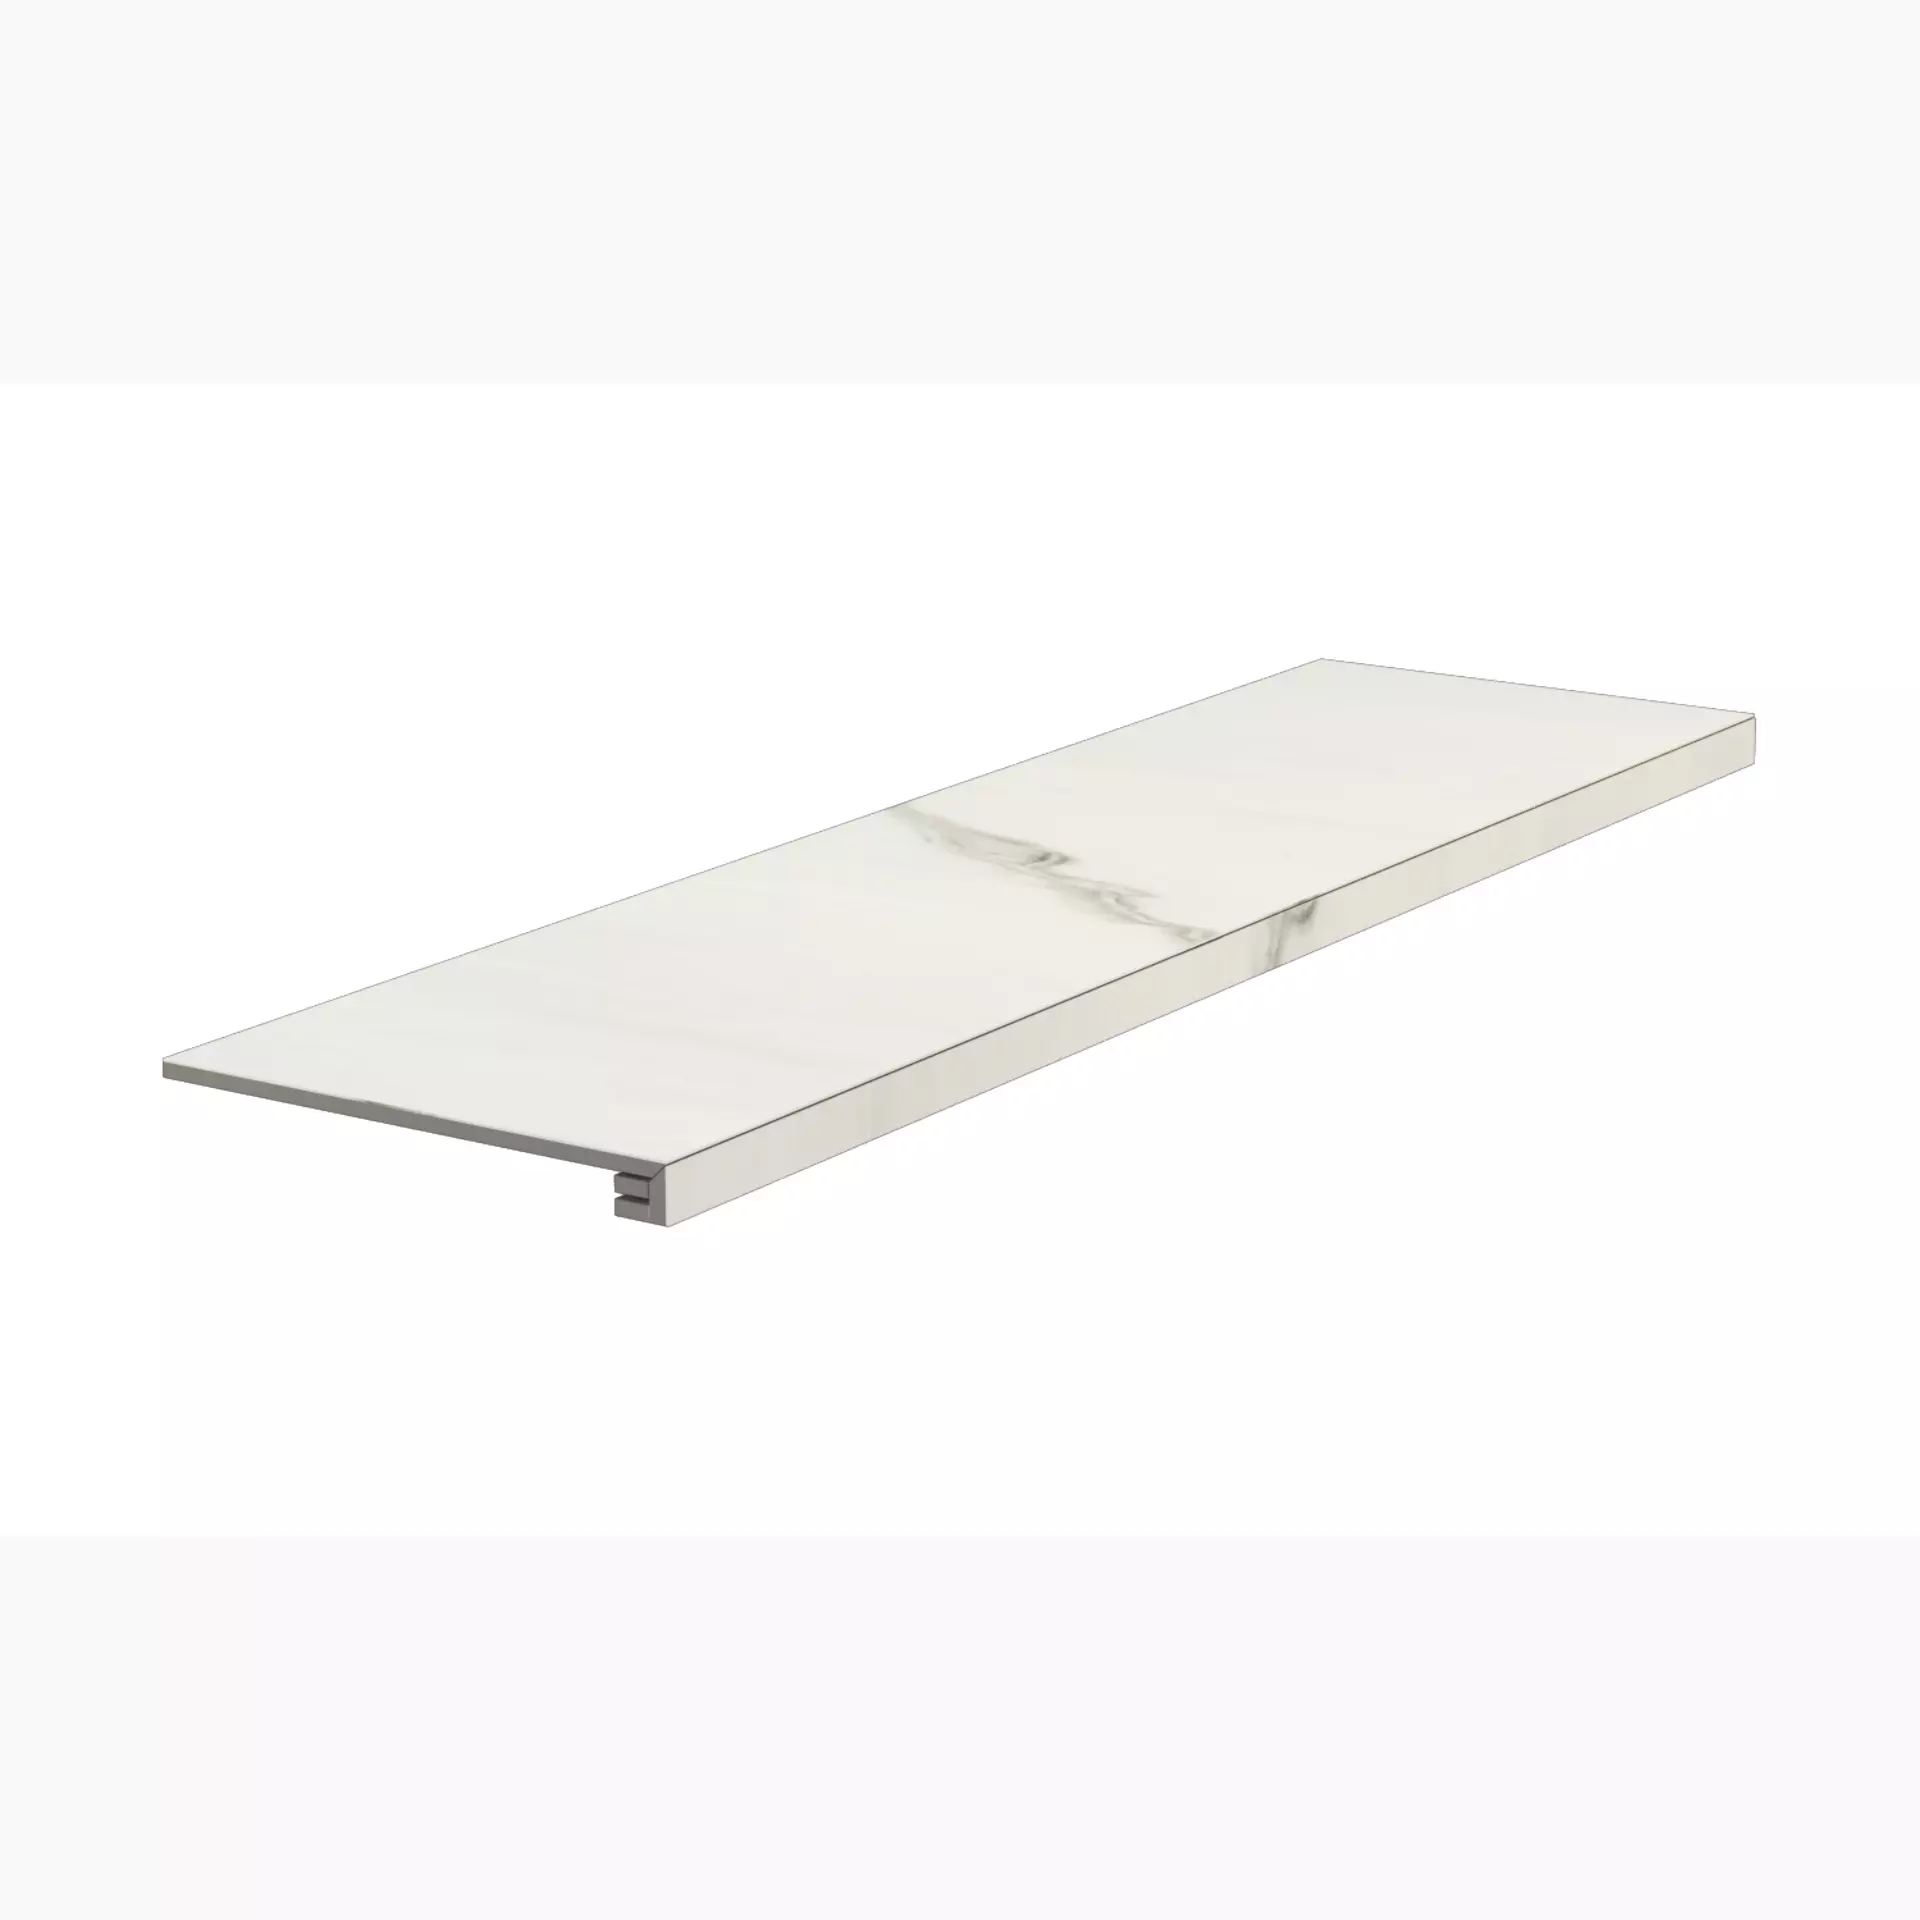 Del Conca Hpm Premiere Onice Bianco Hpm Naturale Step plate Lineare G3PM20RG 33x120cm rectified 8,5mm